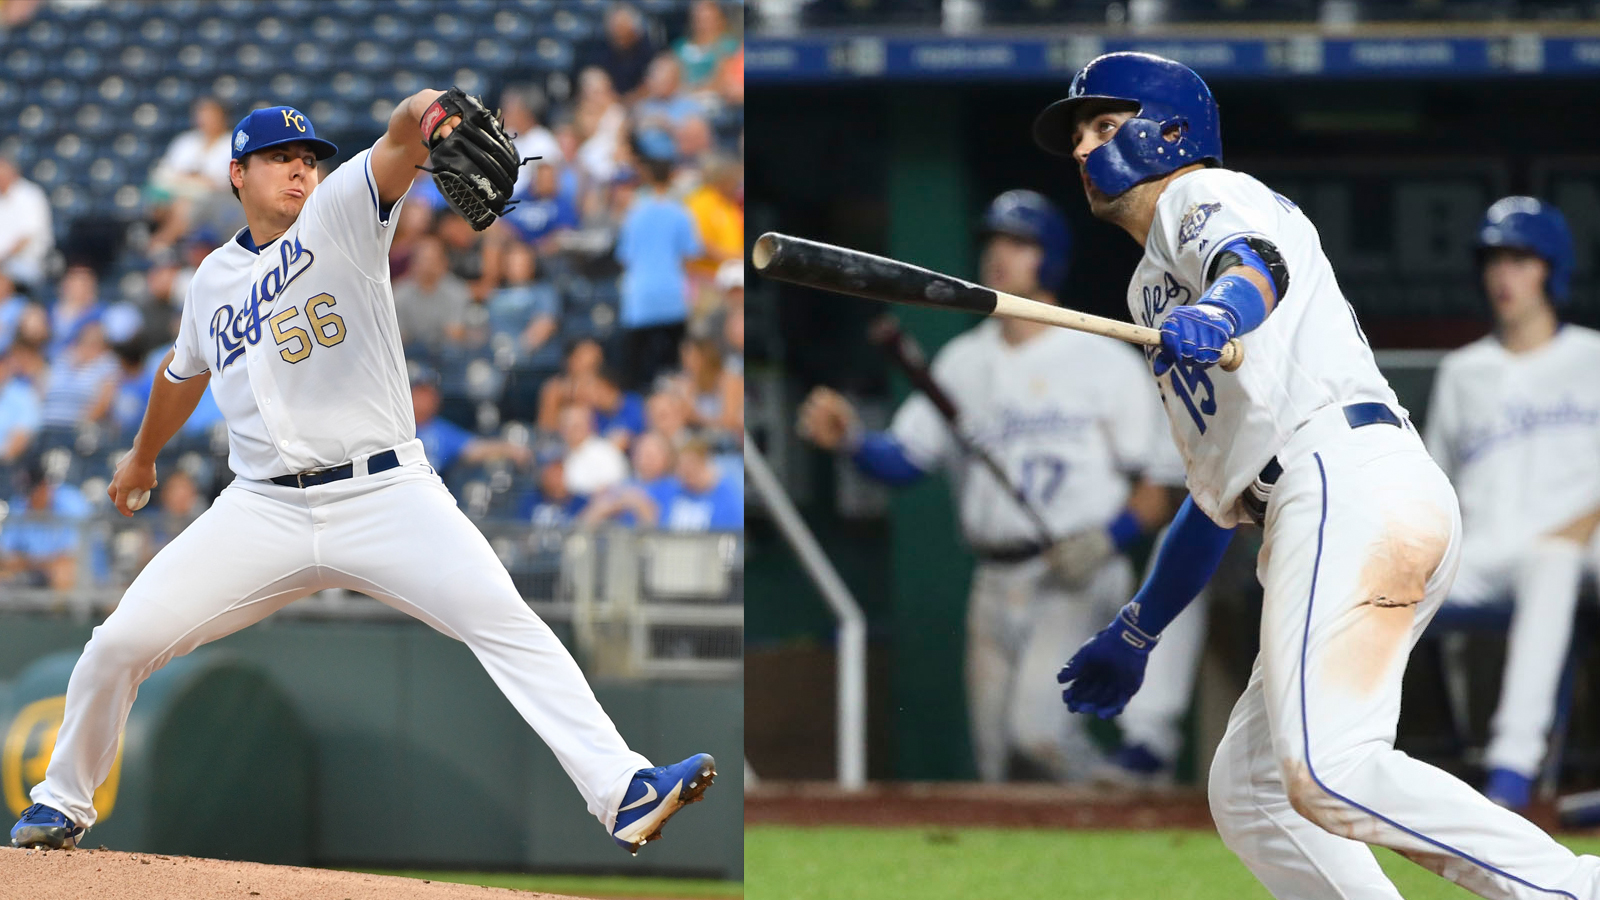 Merrifield and Keller named Royals Player and Pitcher of August